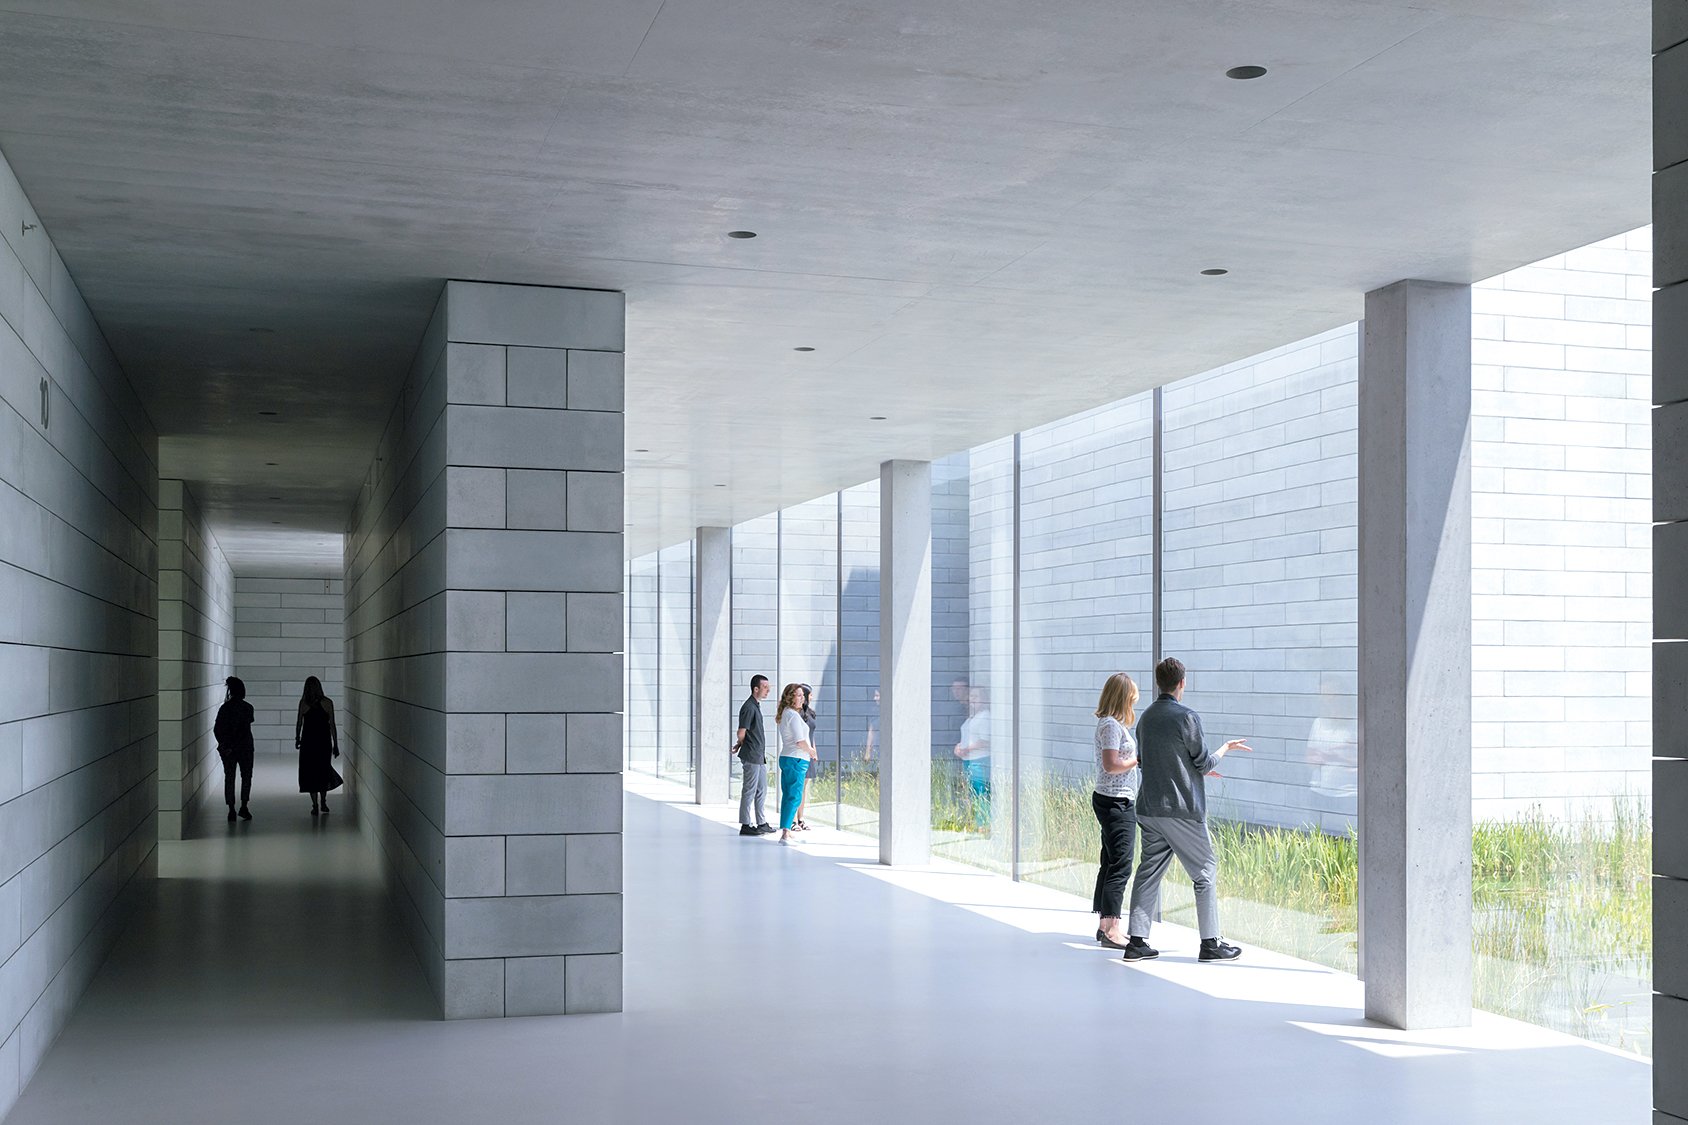 Floor-to-ceiling glass walls help integrate the new exhibition space with Glenstone’s impressive natural surroundings. Photograph by Iwan Baan.